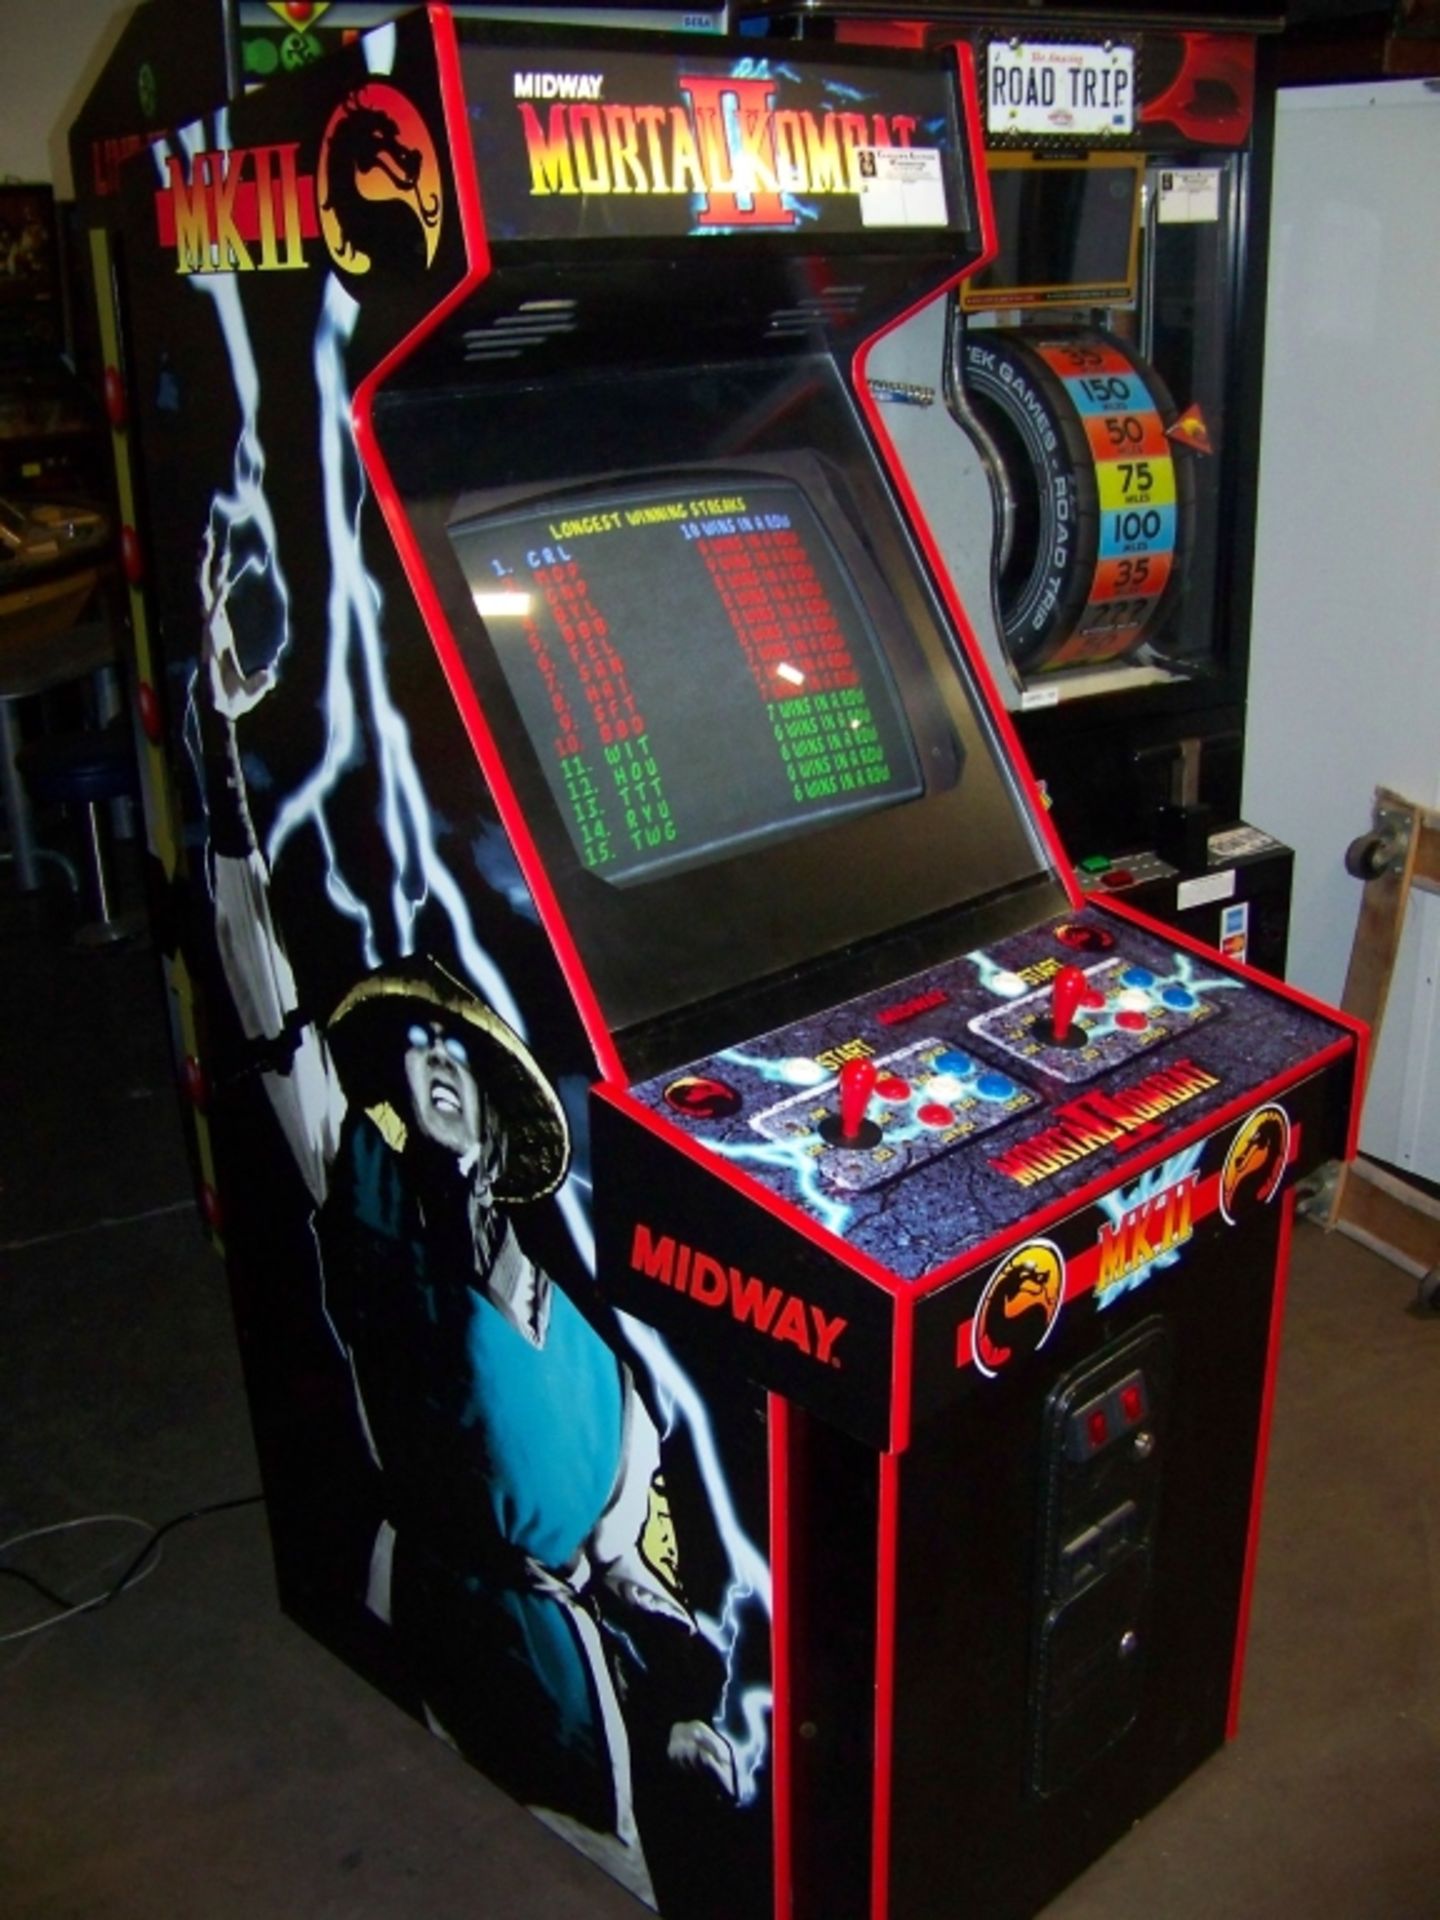 MORTAL KOMBAT II ARCADE GAME MIDWAY Item is in used condition. Evidence of wear and commercial